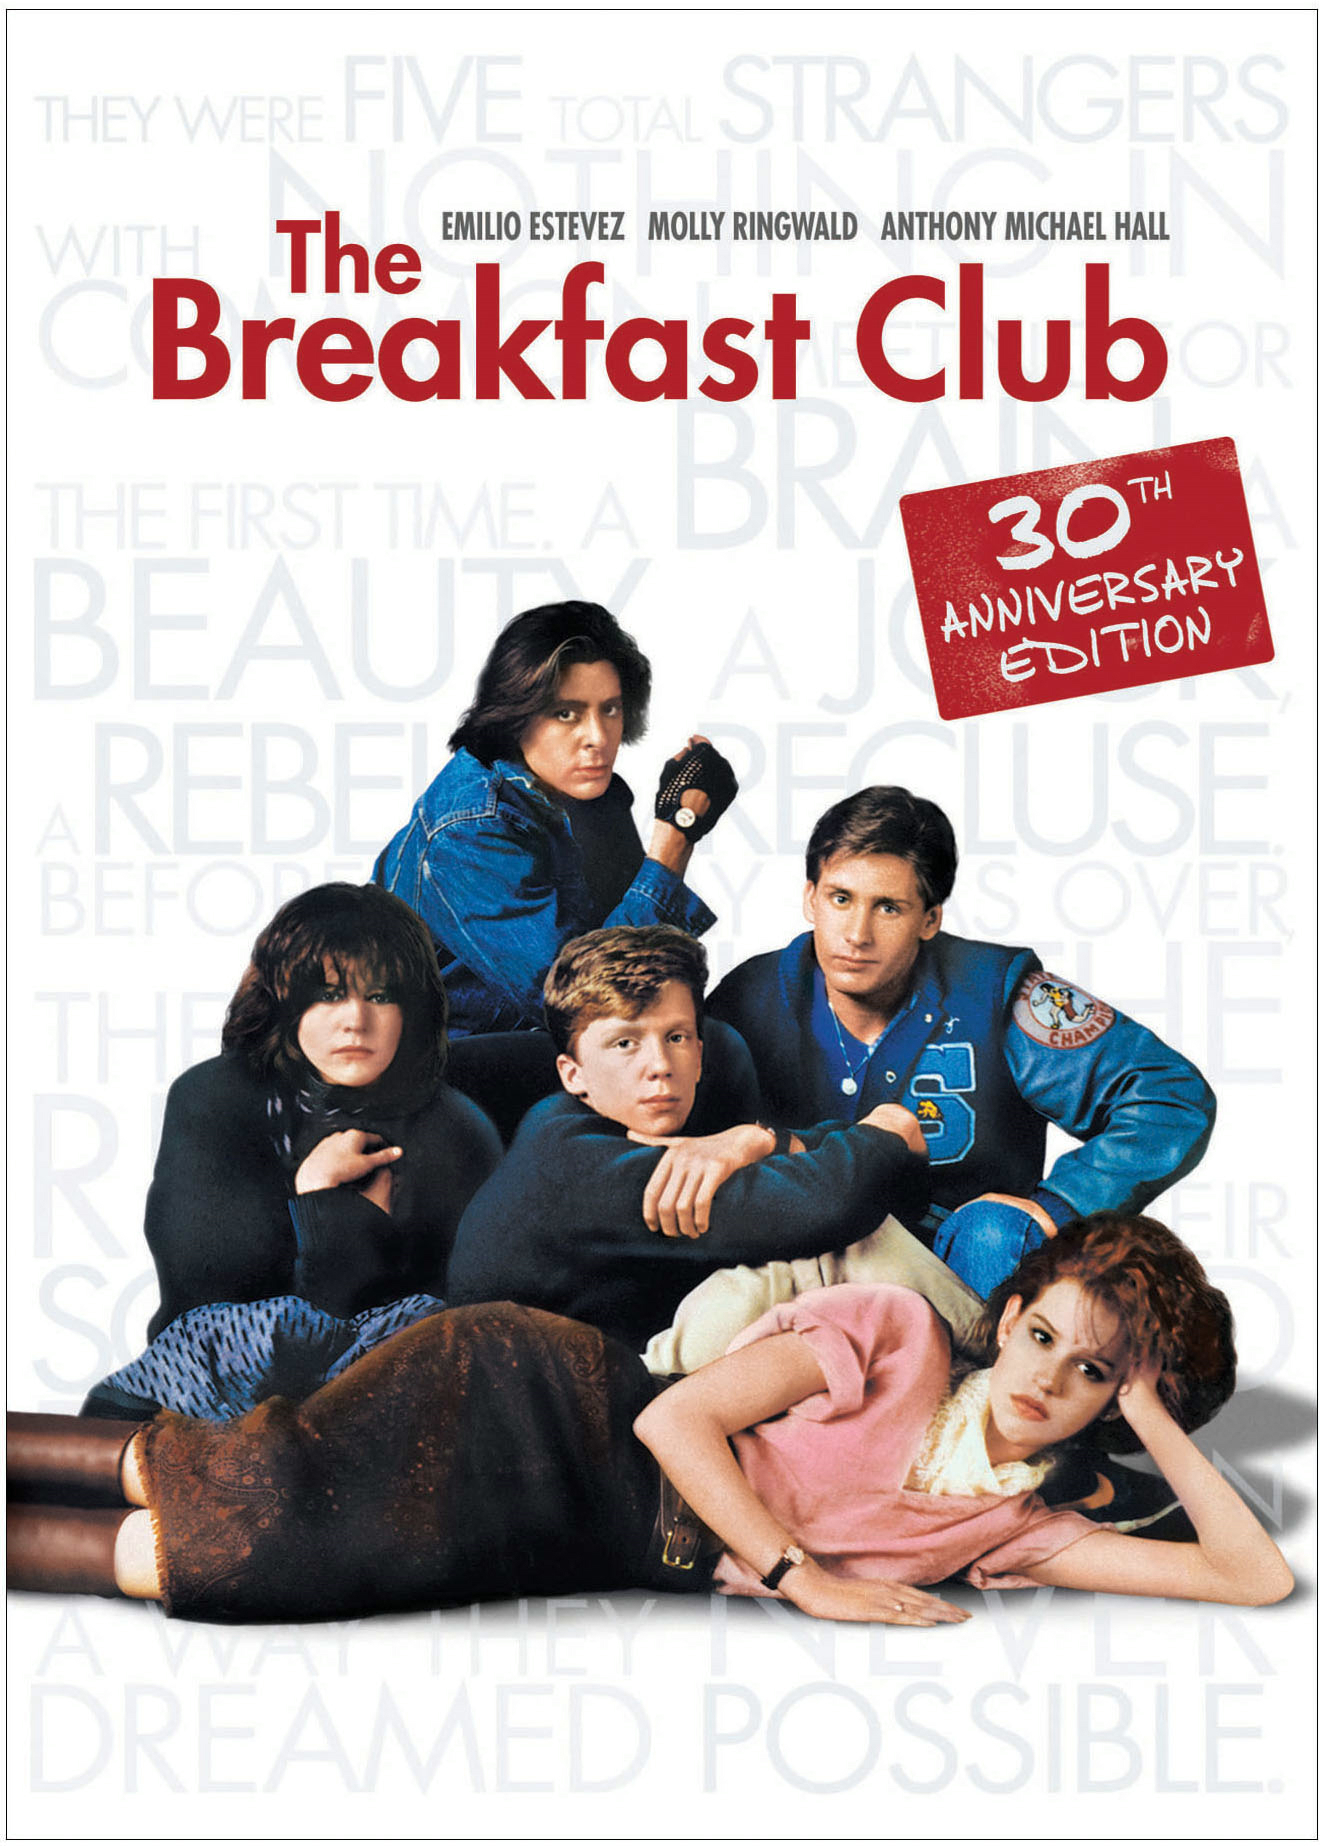 The Breakfast Club (30th Anniversary Edition) - DVD [ 1985 ]  - Comedy Movies On DVD - Movies On GRUV